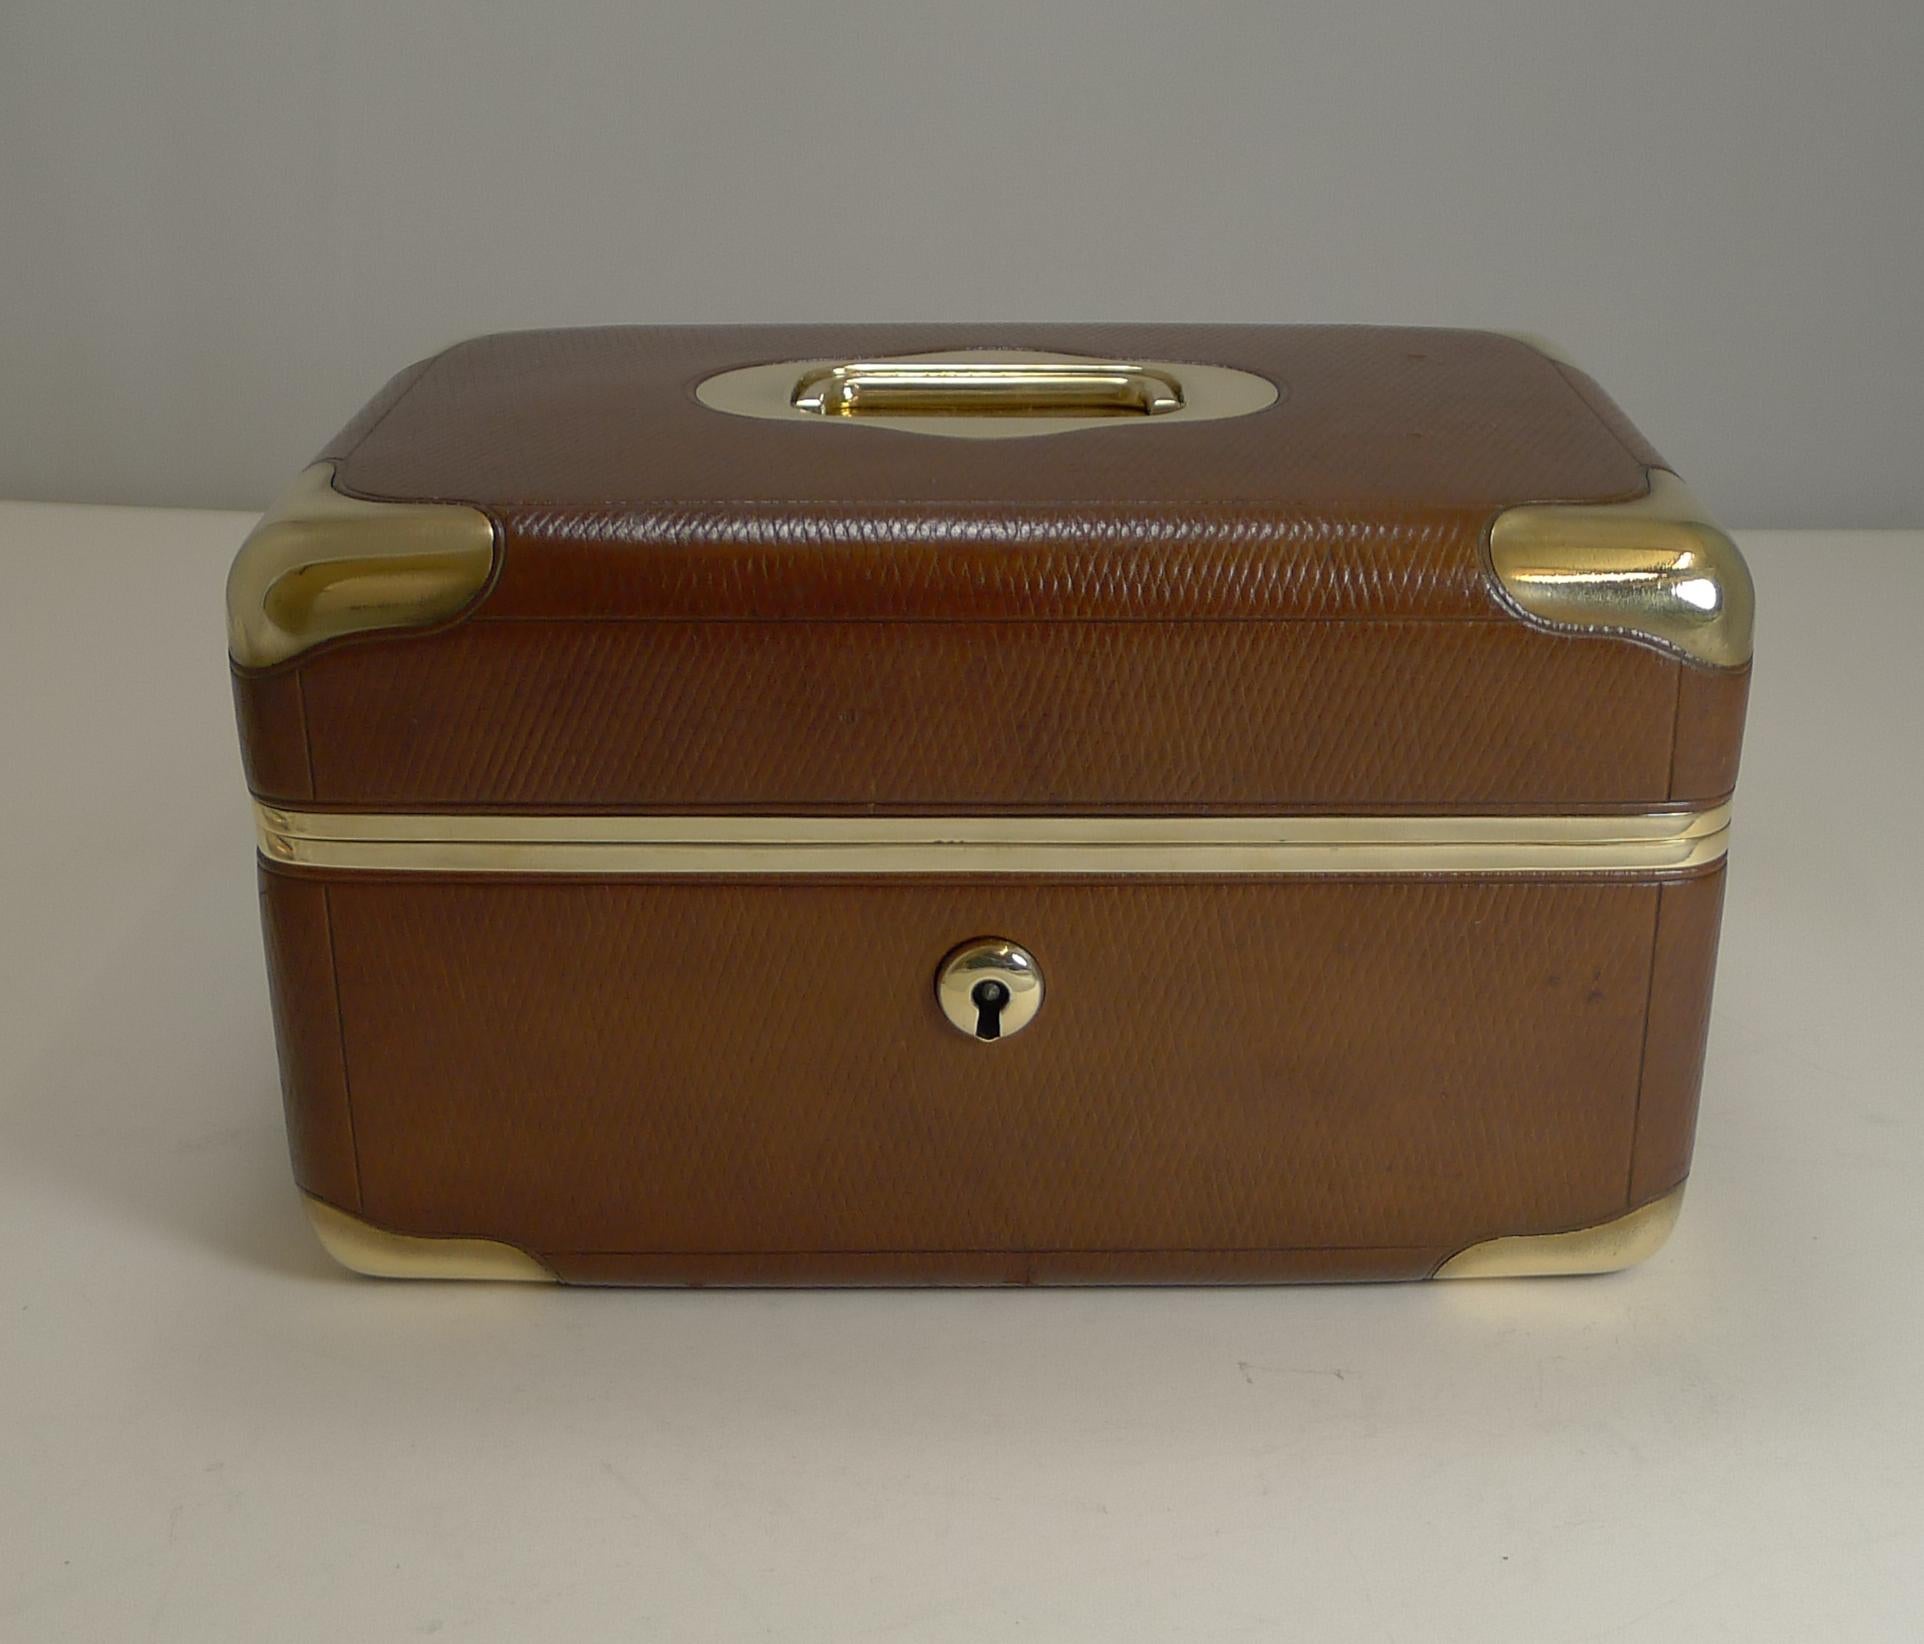 A superb quality box in the style of S-trunk with solid brass corners and a flush campaign style carrying handle inset to the lid.

The box comes with working lock and key, and once opened there is a retailer's signature from Algeria; 